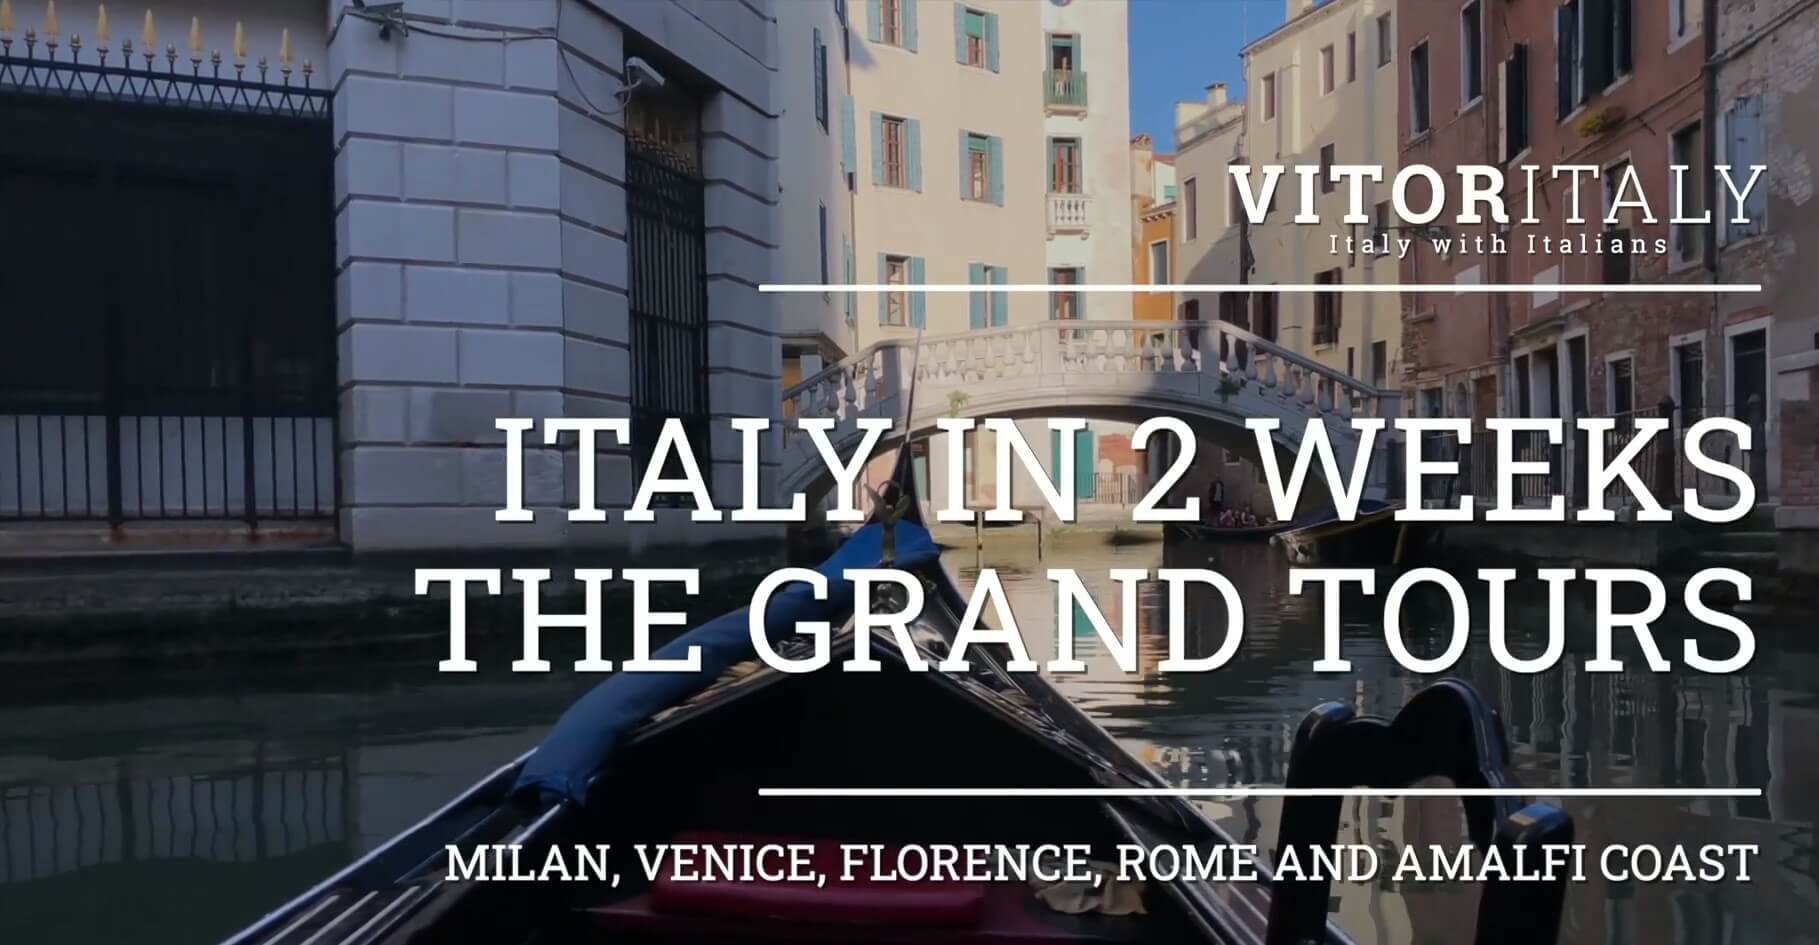 ITALY IN 2 WEEKS PRIVATE LUXURY TOUR - Milan, Venice, Florence, Rome and Amalfi Coast